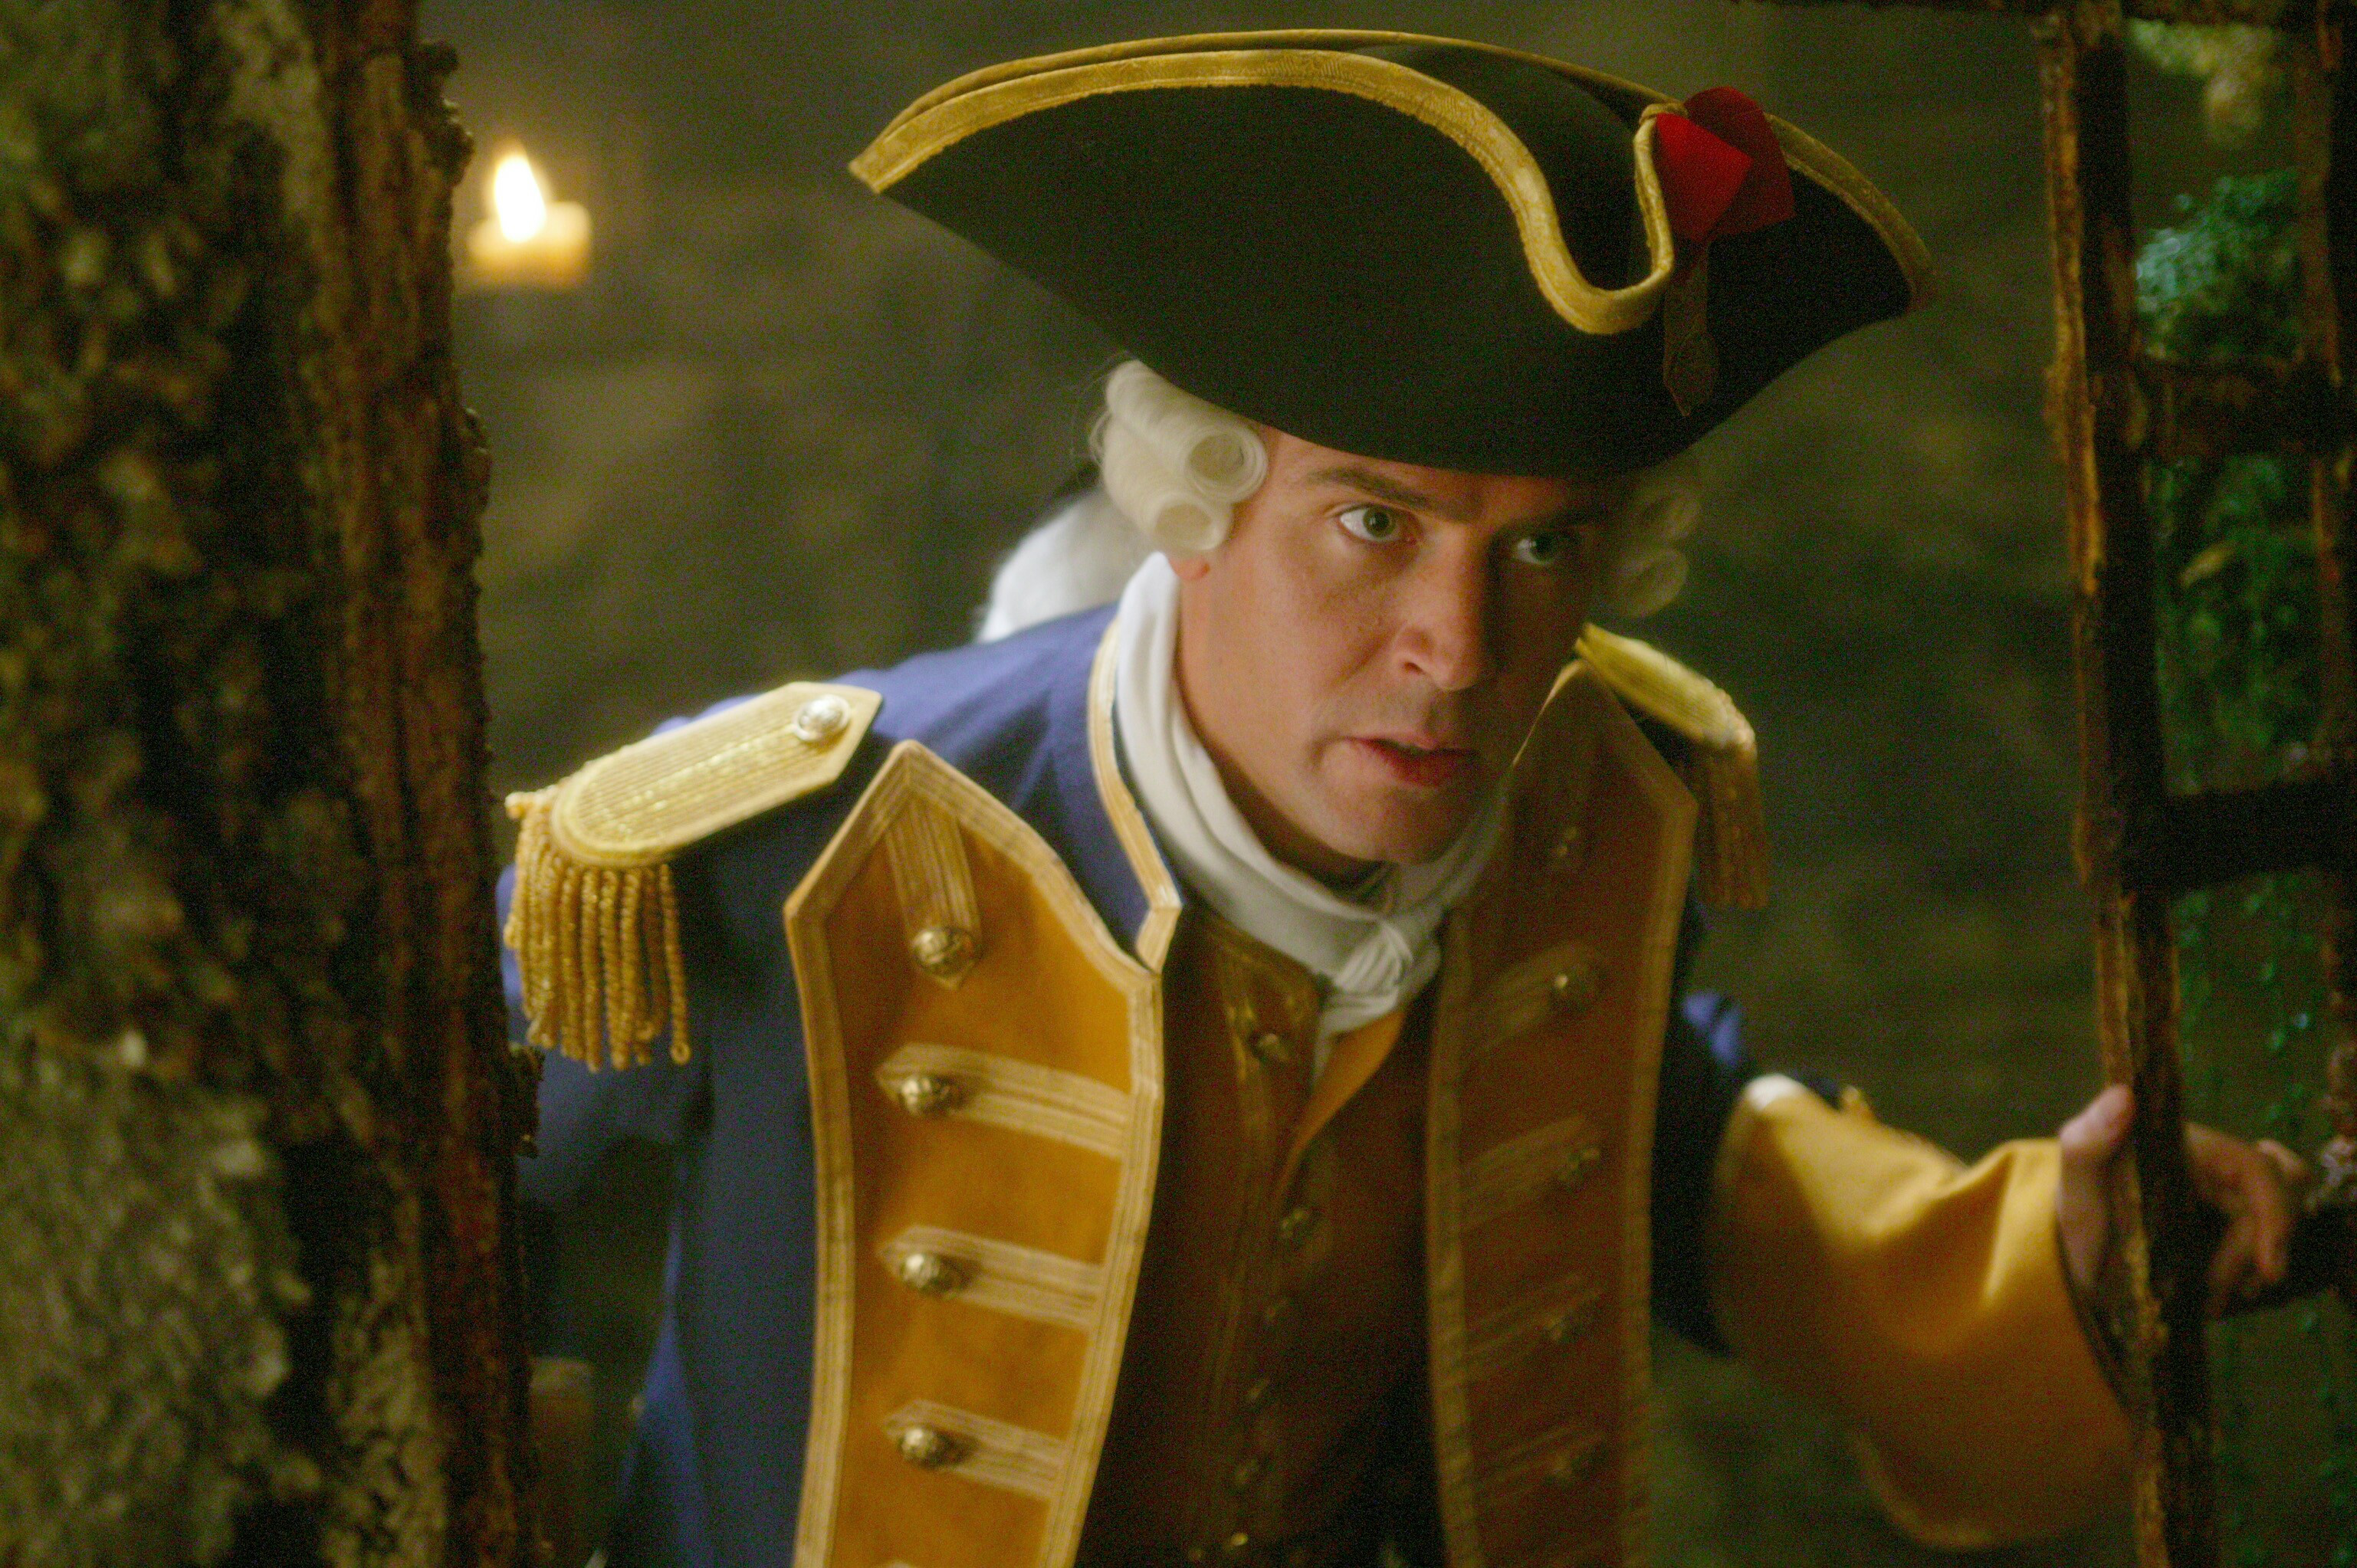 pirates of the caribbean, movie, pirates of the caribbean: at world's end, jack davenport, james norrington